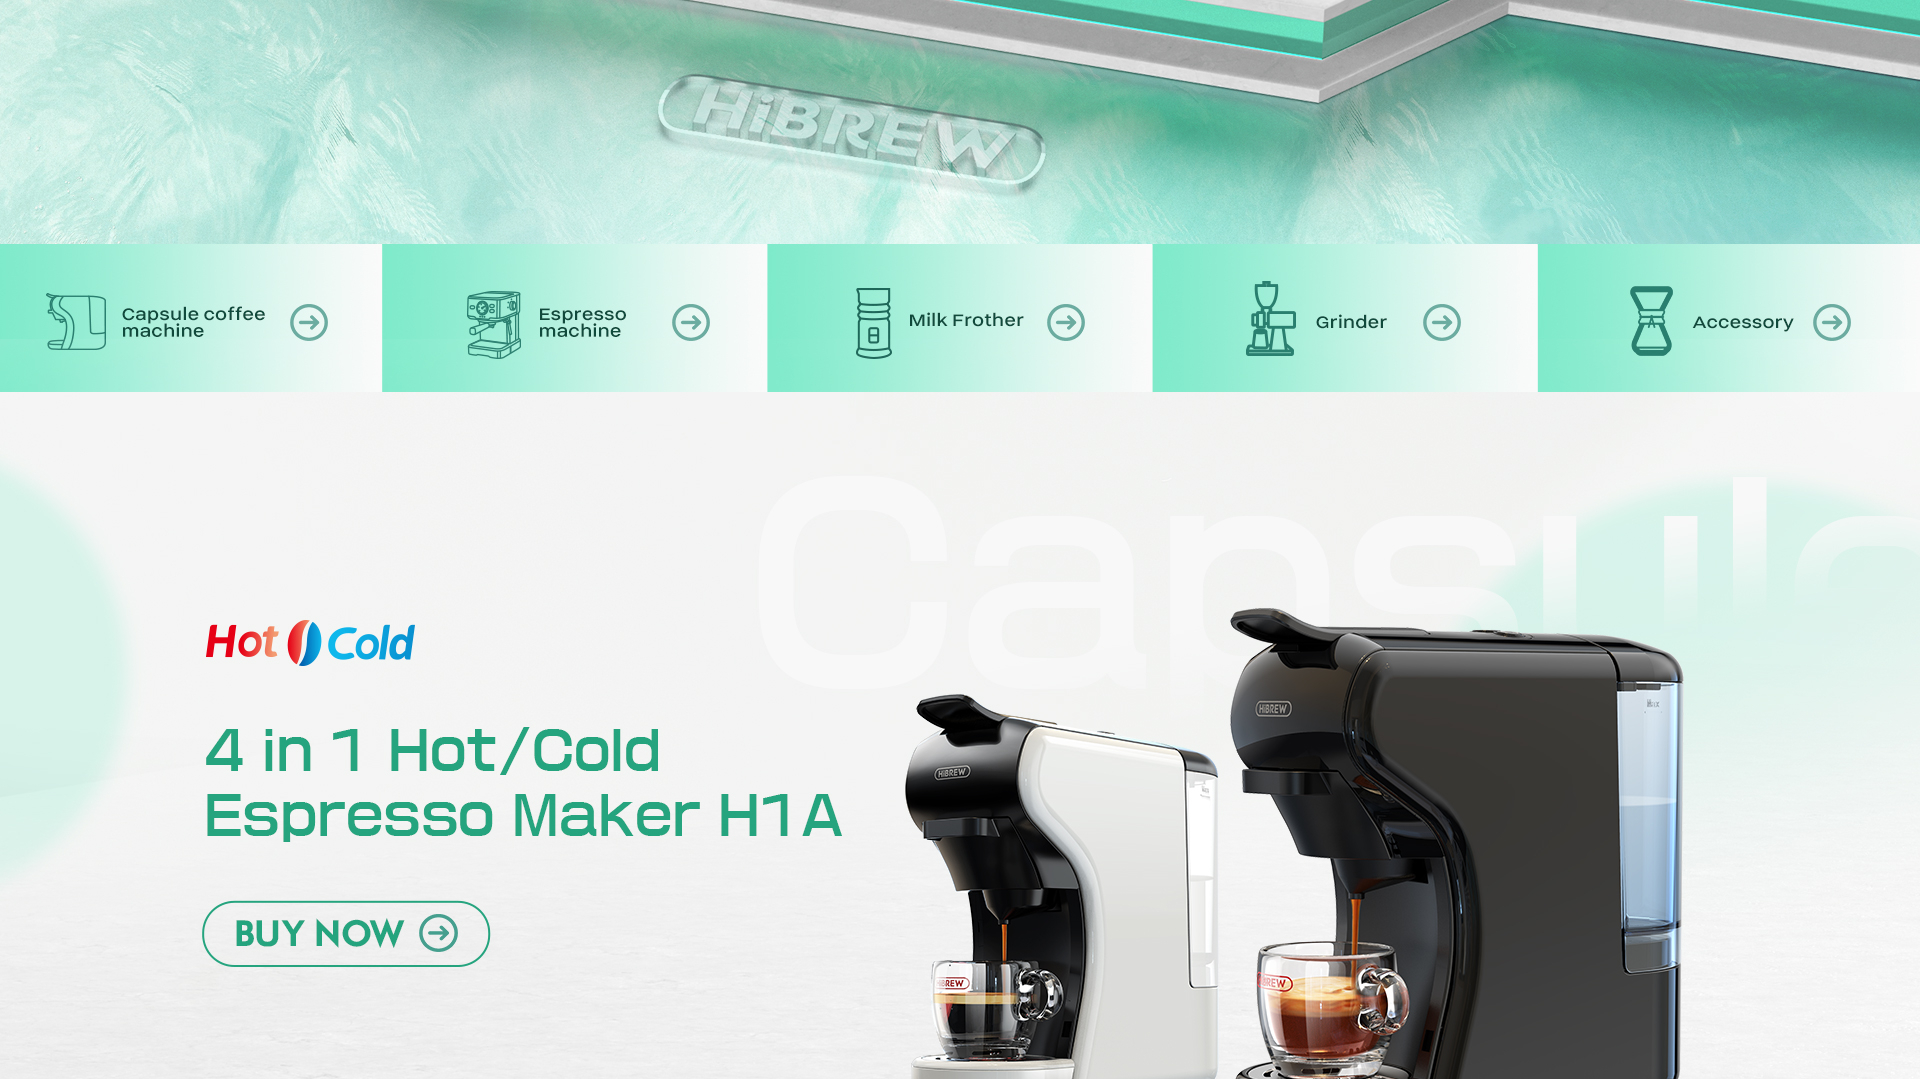 Milk Frother M2A - HiBREW